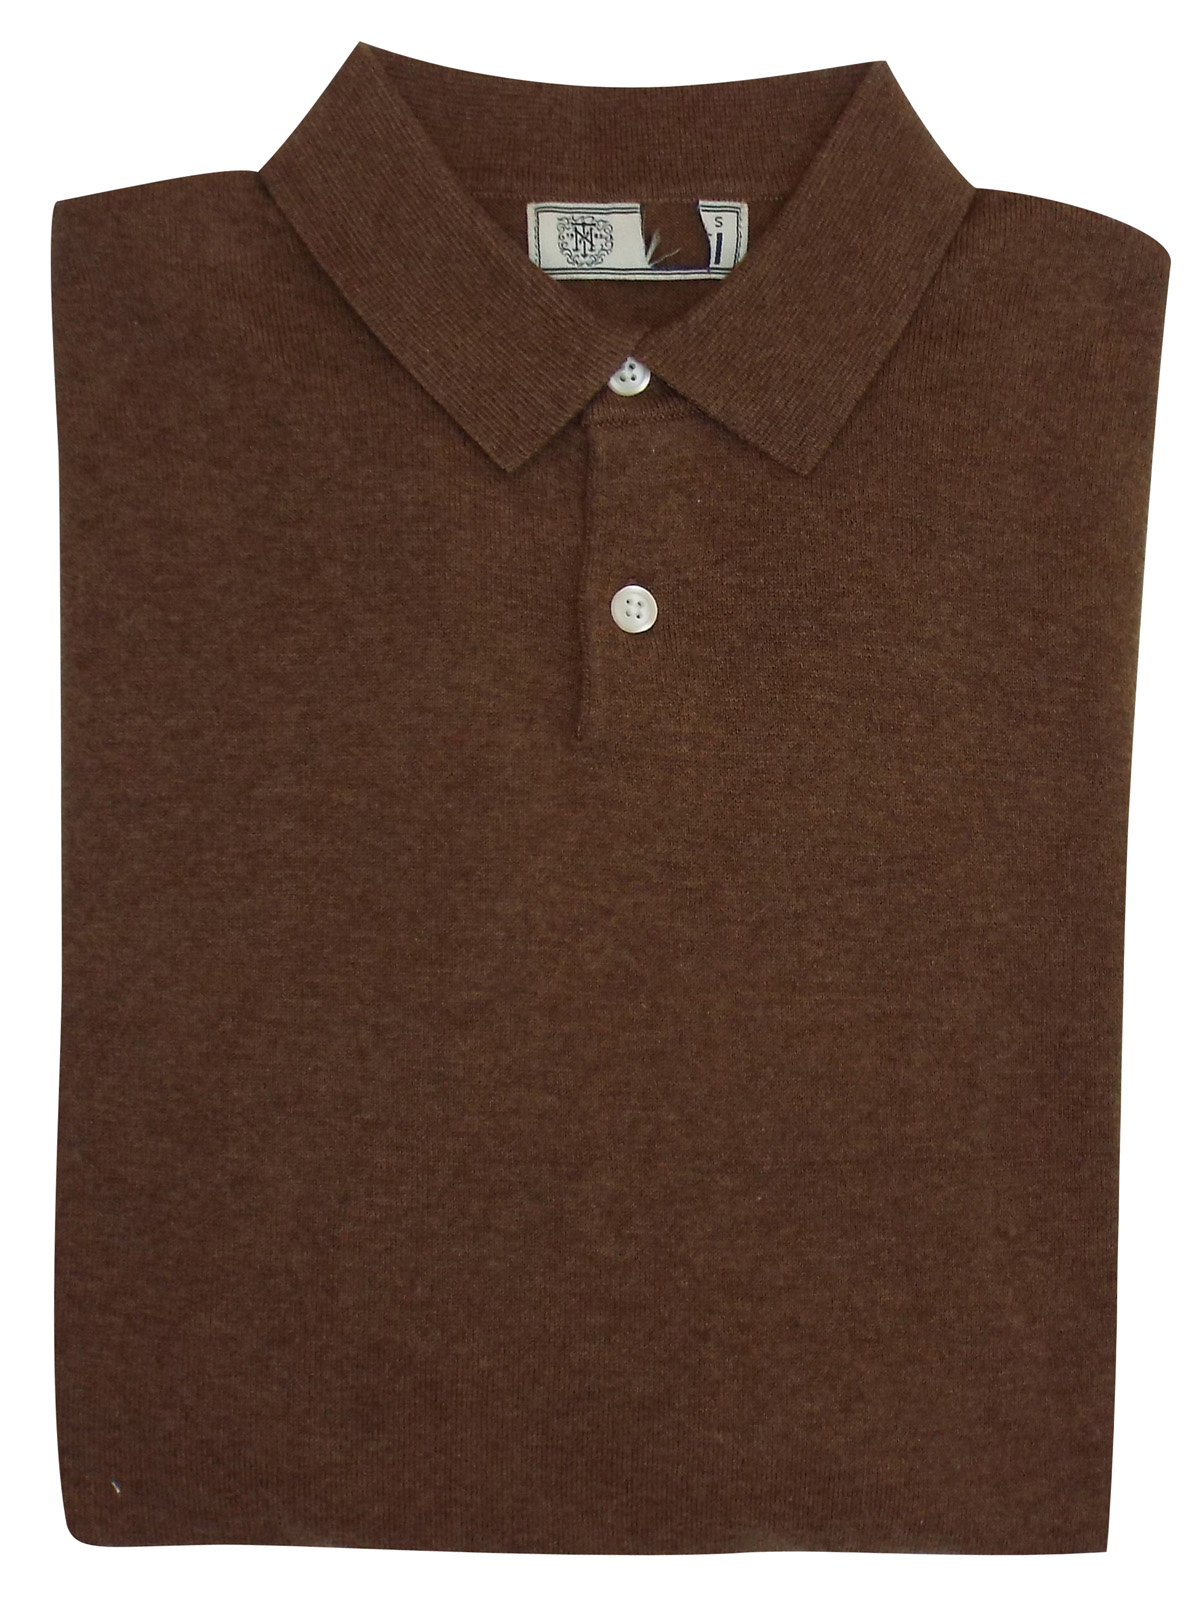 N3XT TAN Mens Cotton Rich Long Sleeve Polo Shirt - Size Large to XLarge